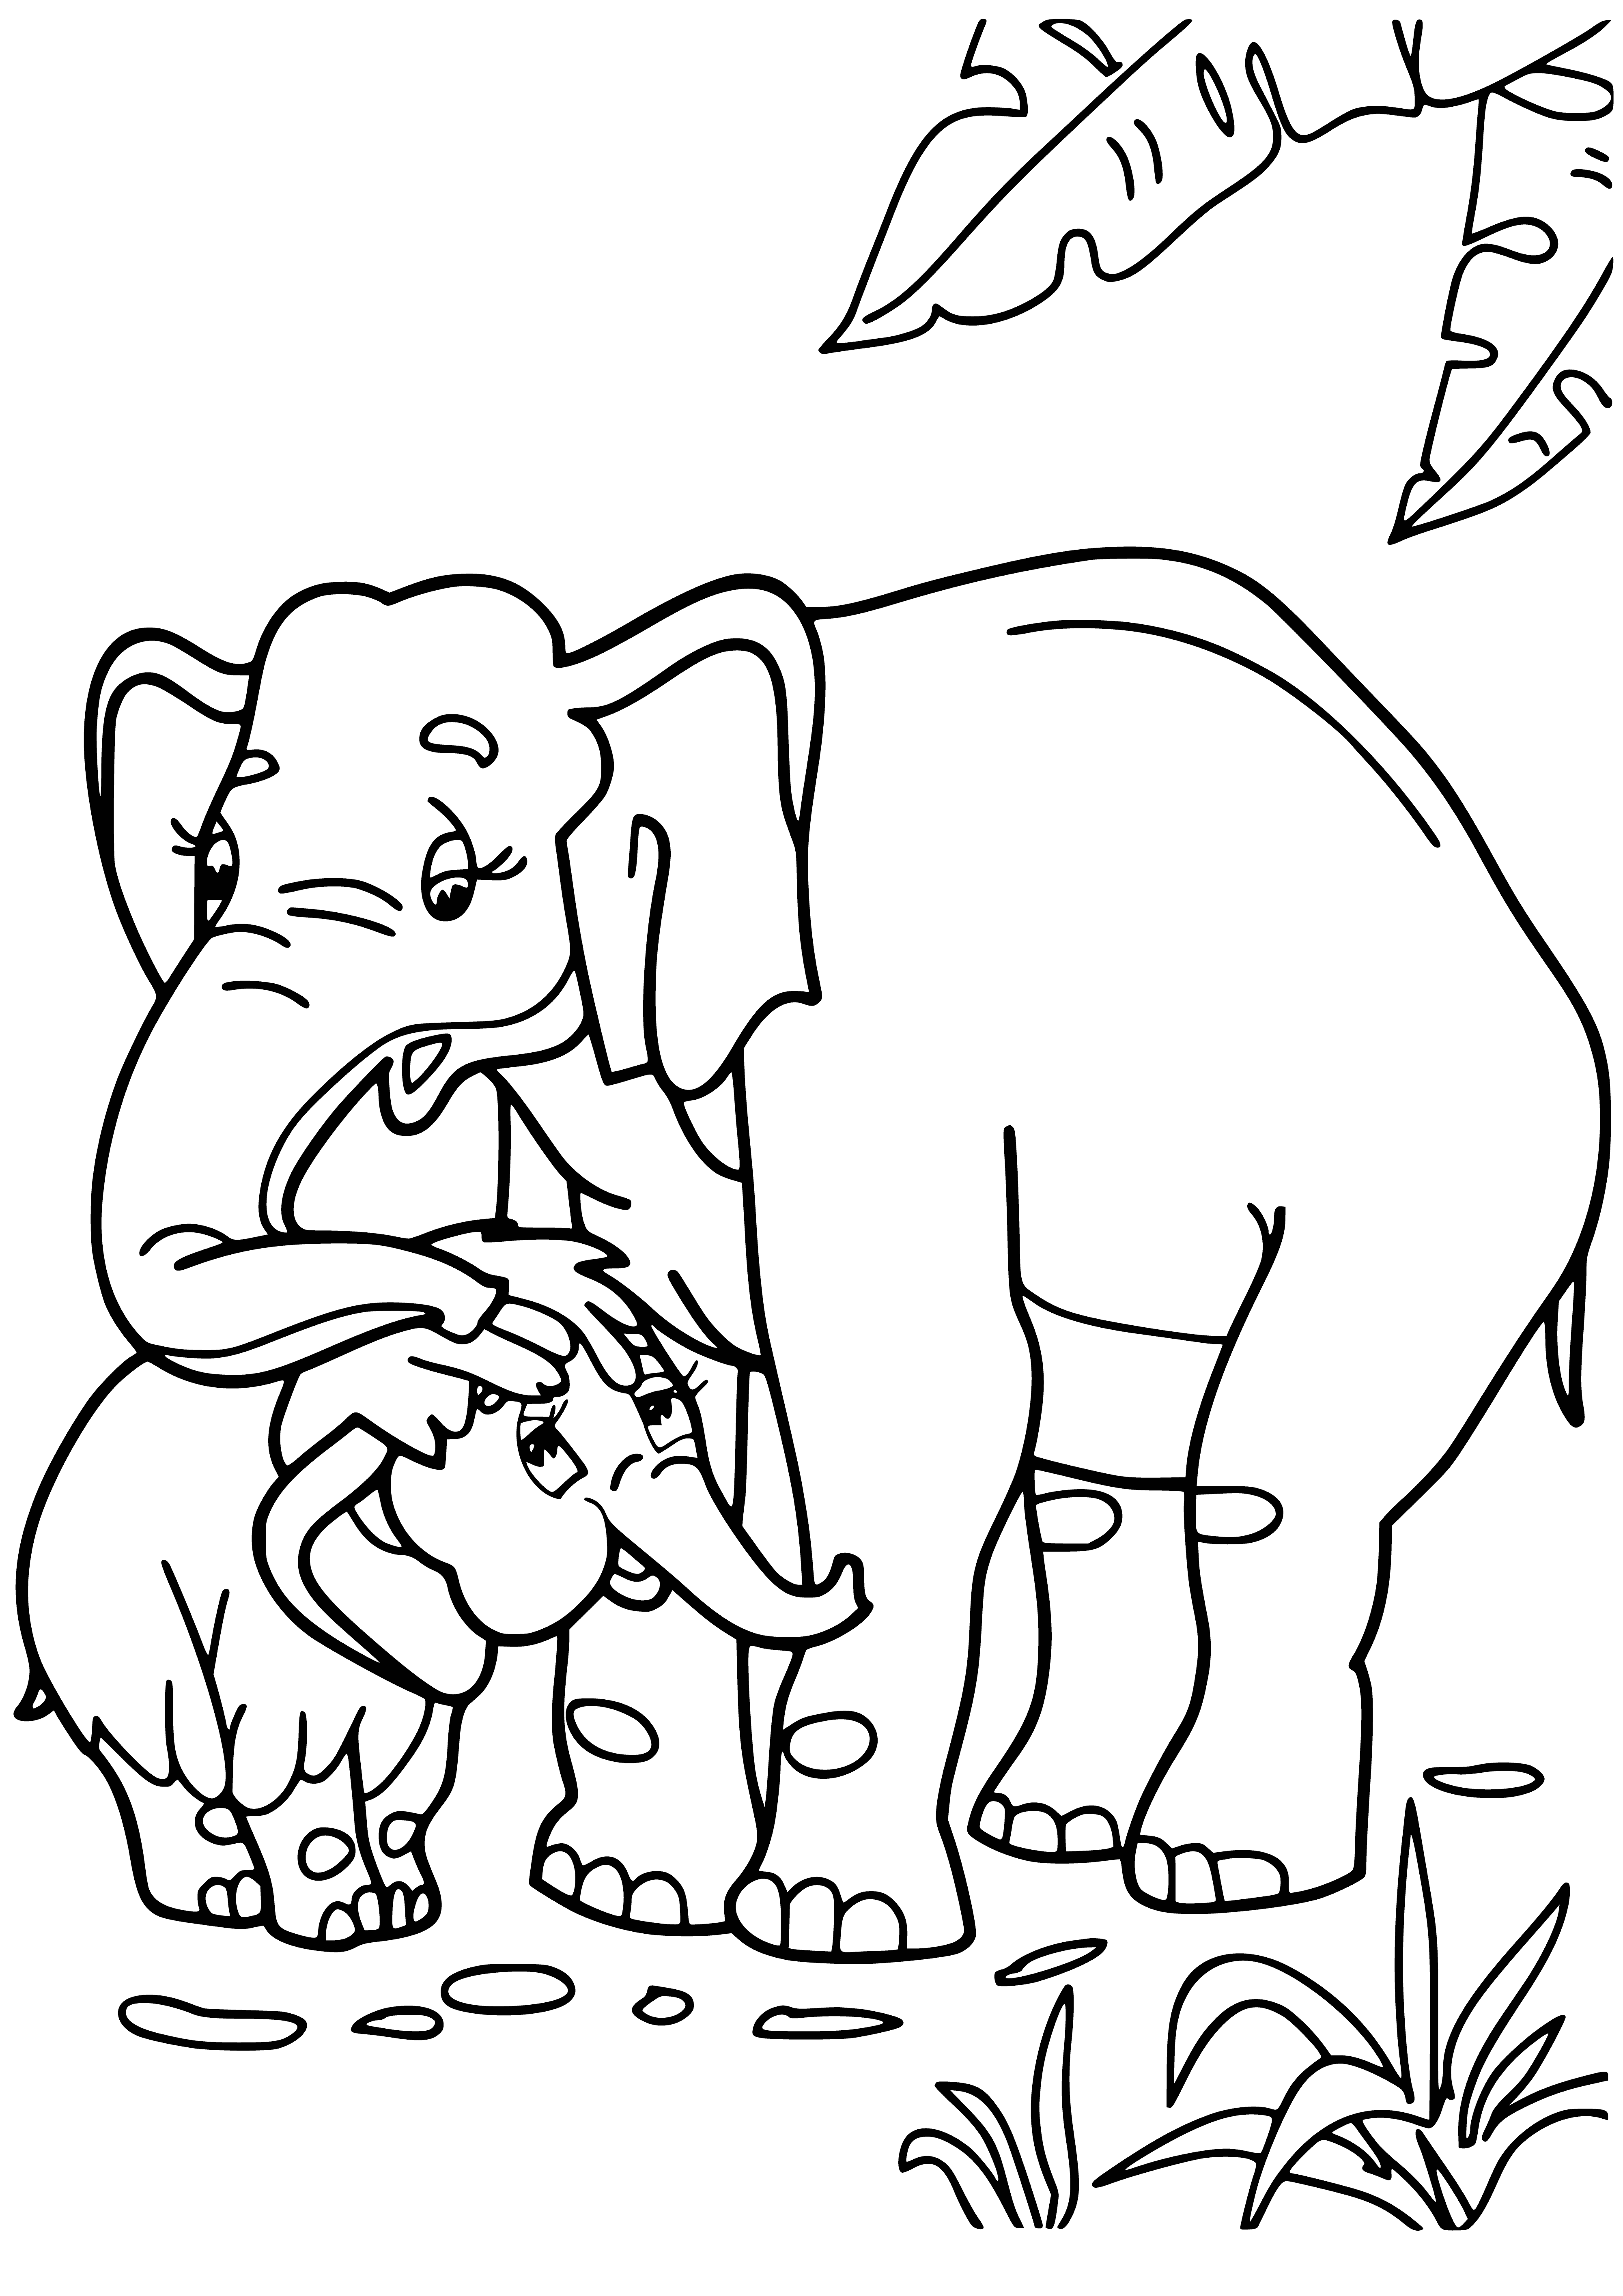 A mammoth lying on its side with long, curved tusks & thick, shaggy fur. It has closed eyes & large teeth are visible in its open mouth. #coloringpage